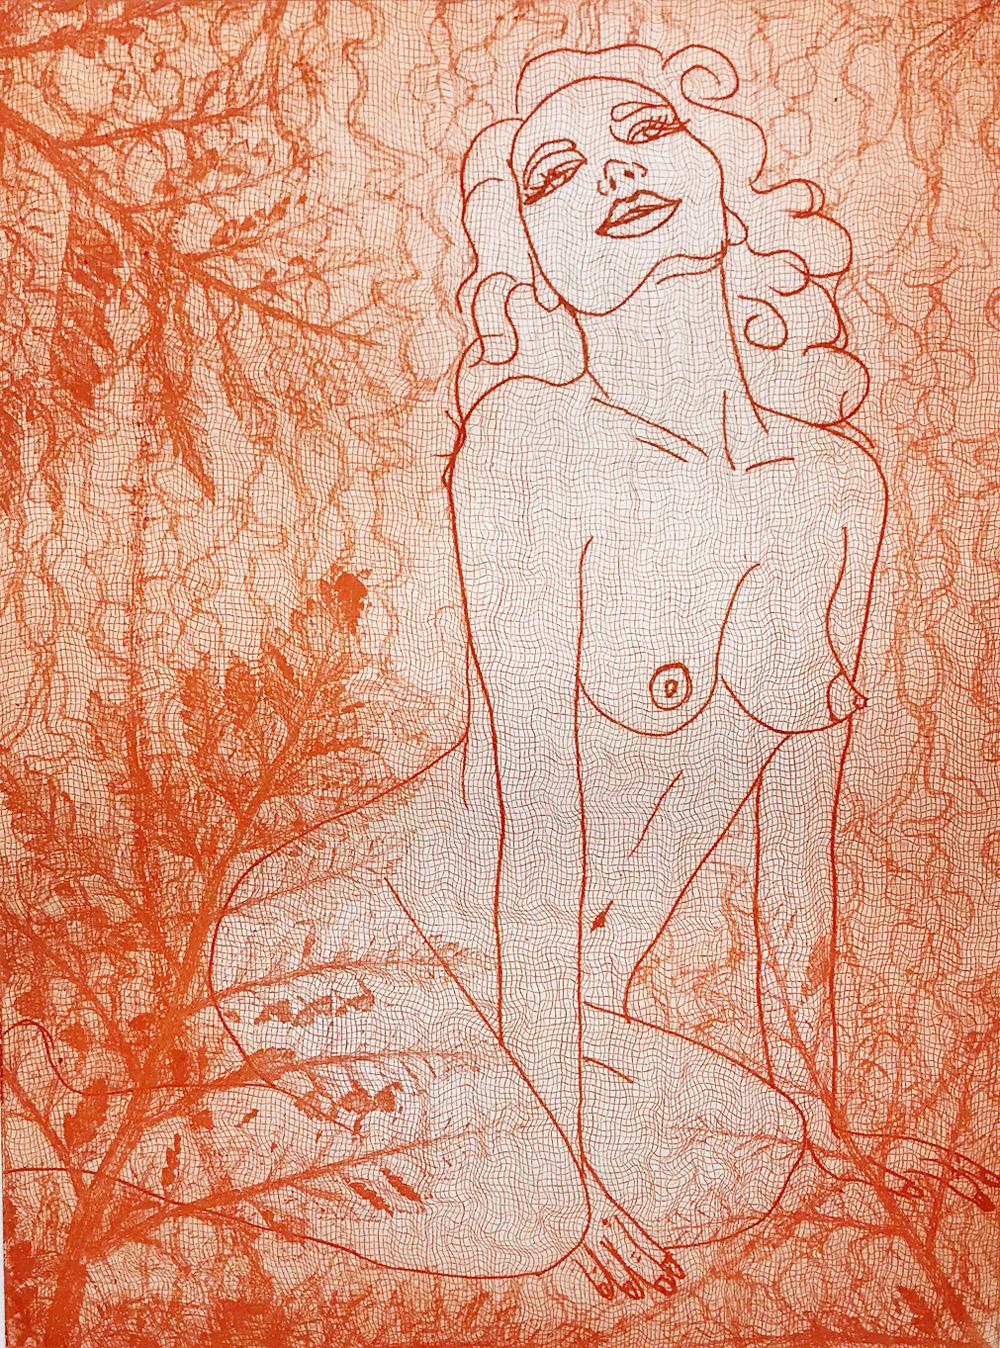 Tangerine Dream, Intaglio Etching, Watercolor, Figurative, Nude, Signed, Framed - Art by Indira Cesarine